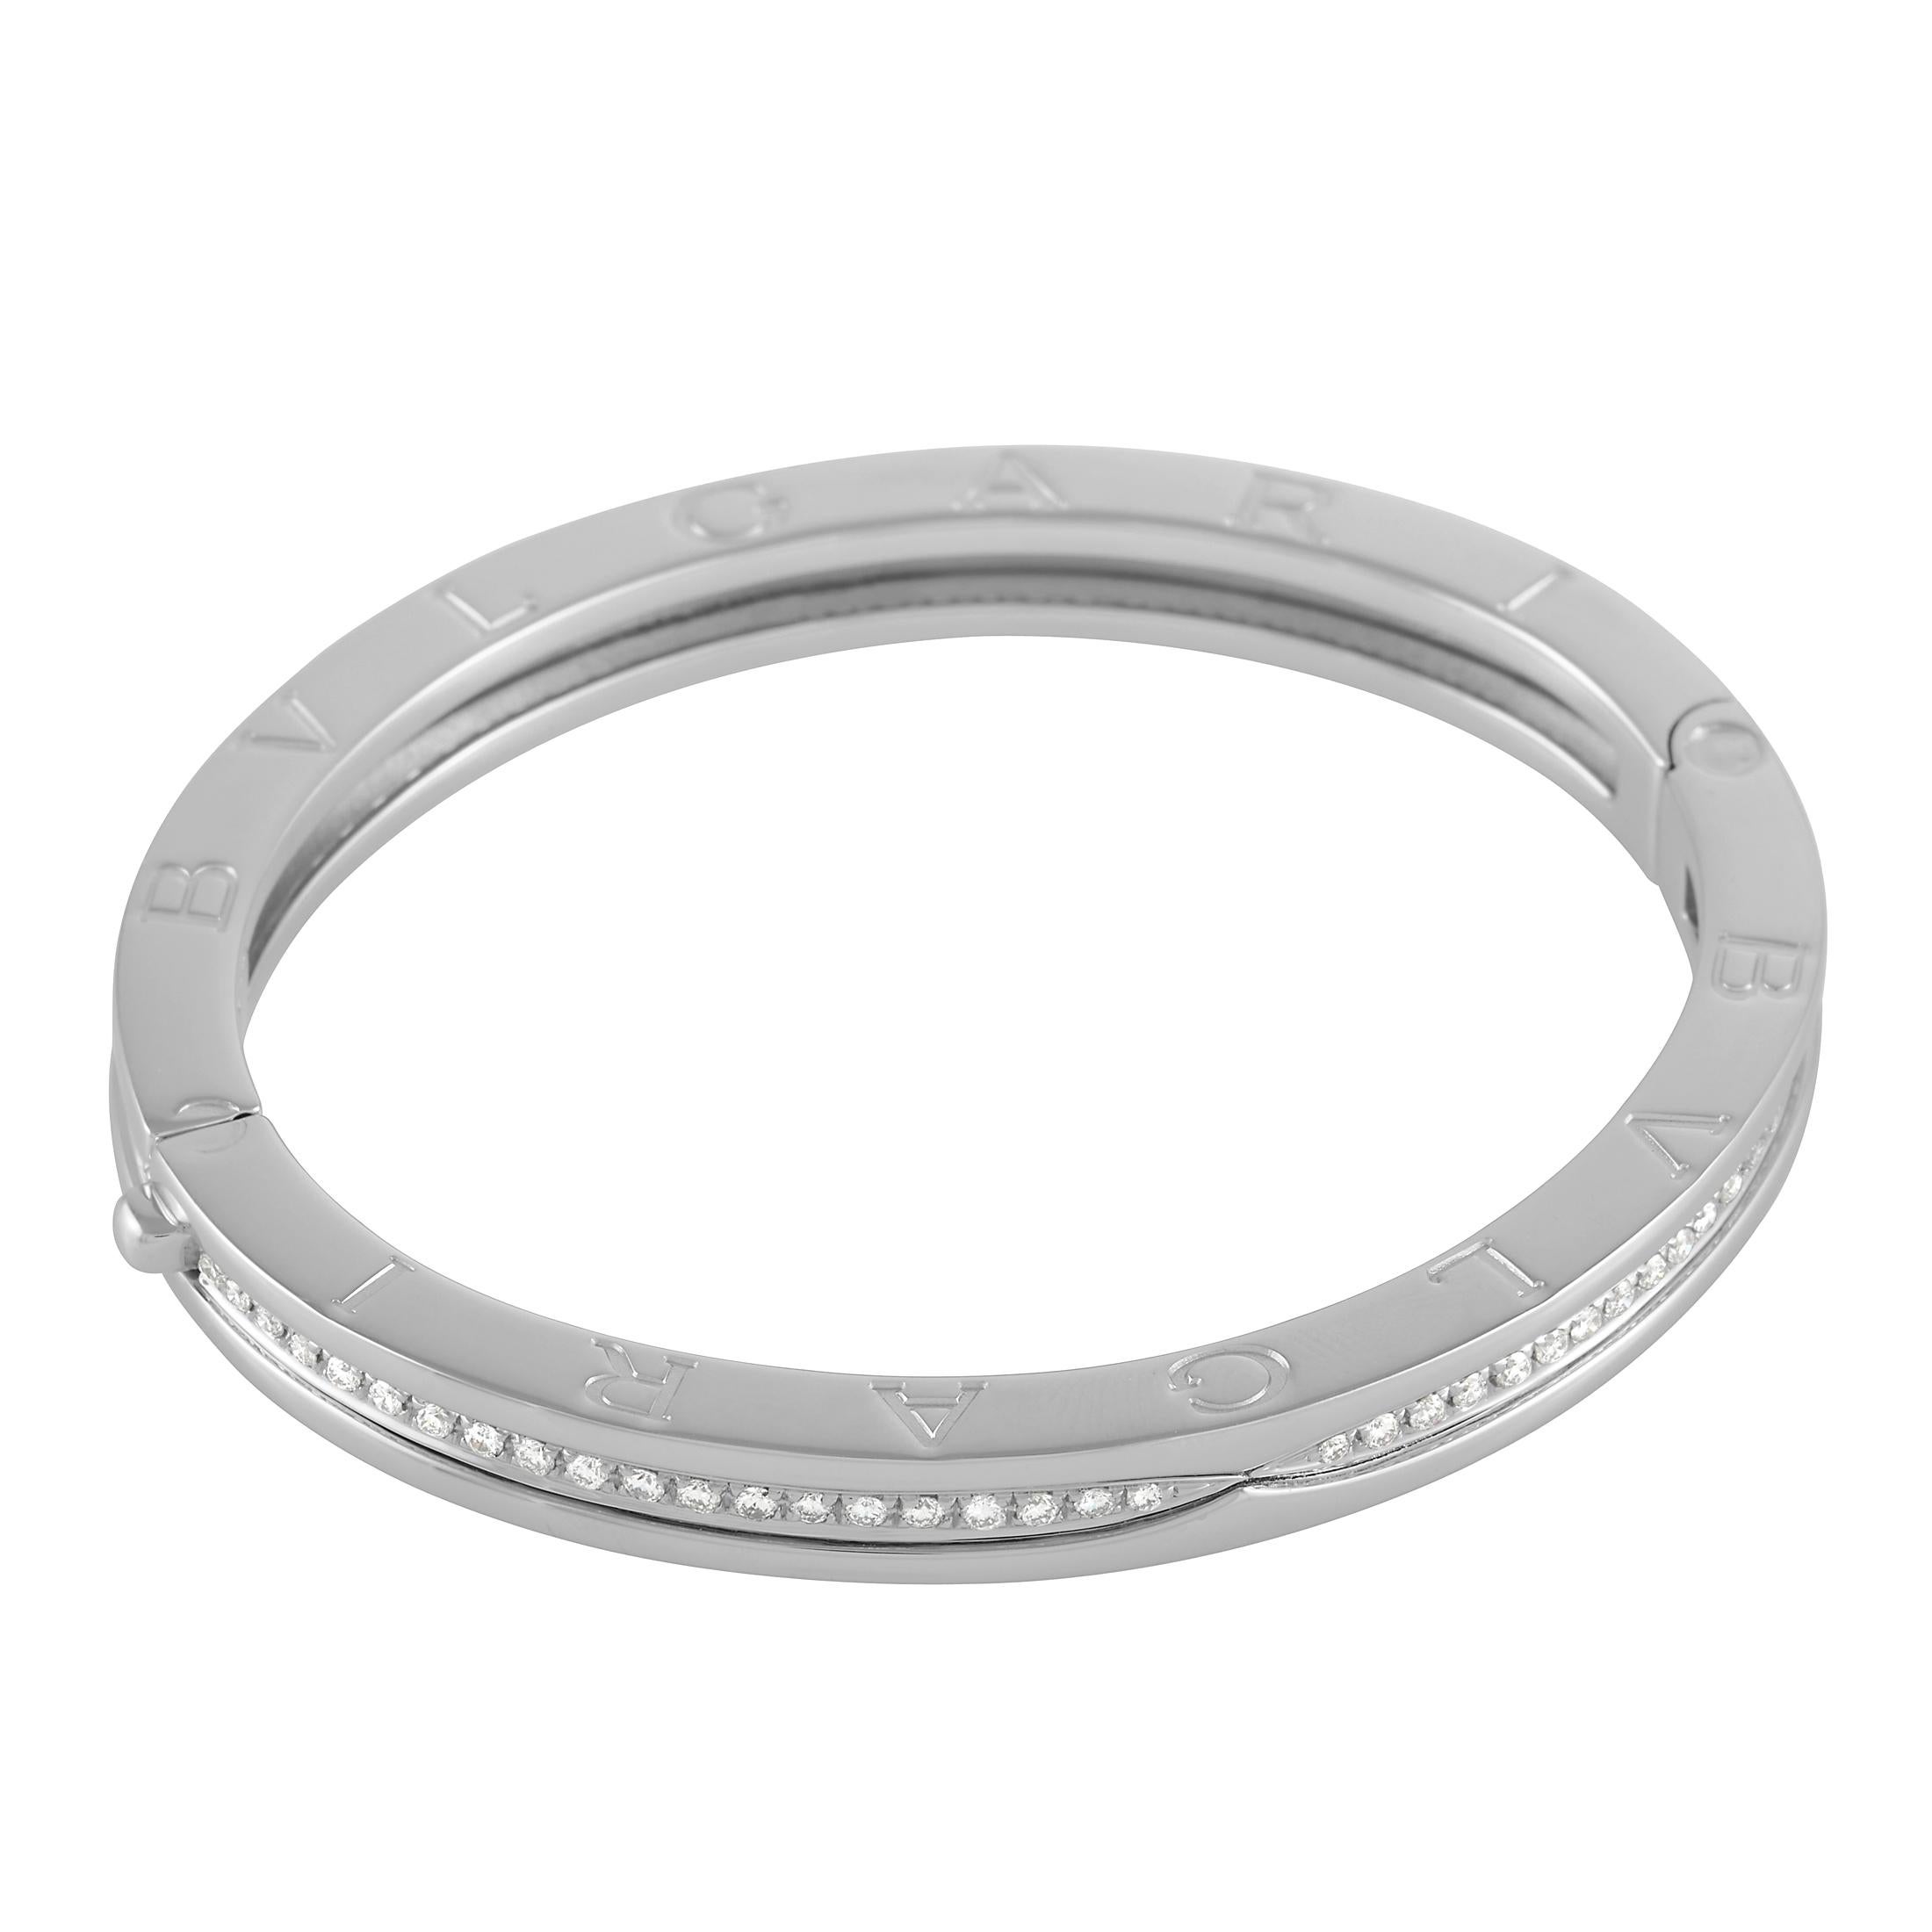 A sleek profile and a timeless sense of style make this Bvlgari B Zero bracelet simply sensational. This elegant bangle radiates light thanks to the series of diamonds totaling 1.52 carats with F color and VVS clarity. You’ll also find the luxury